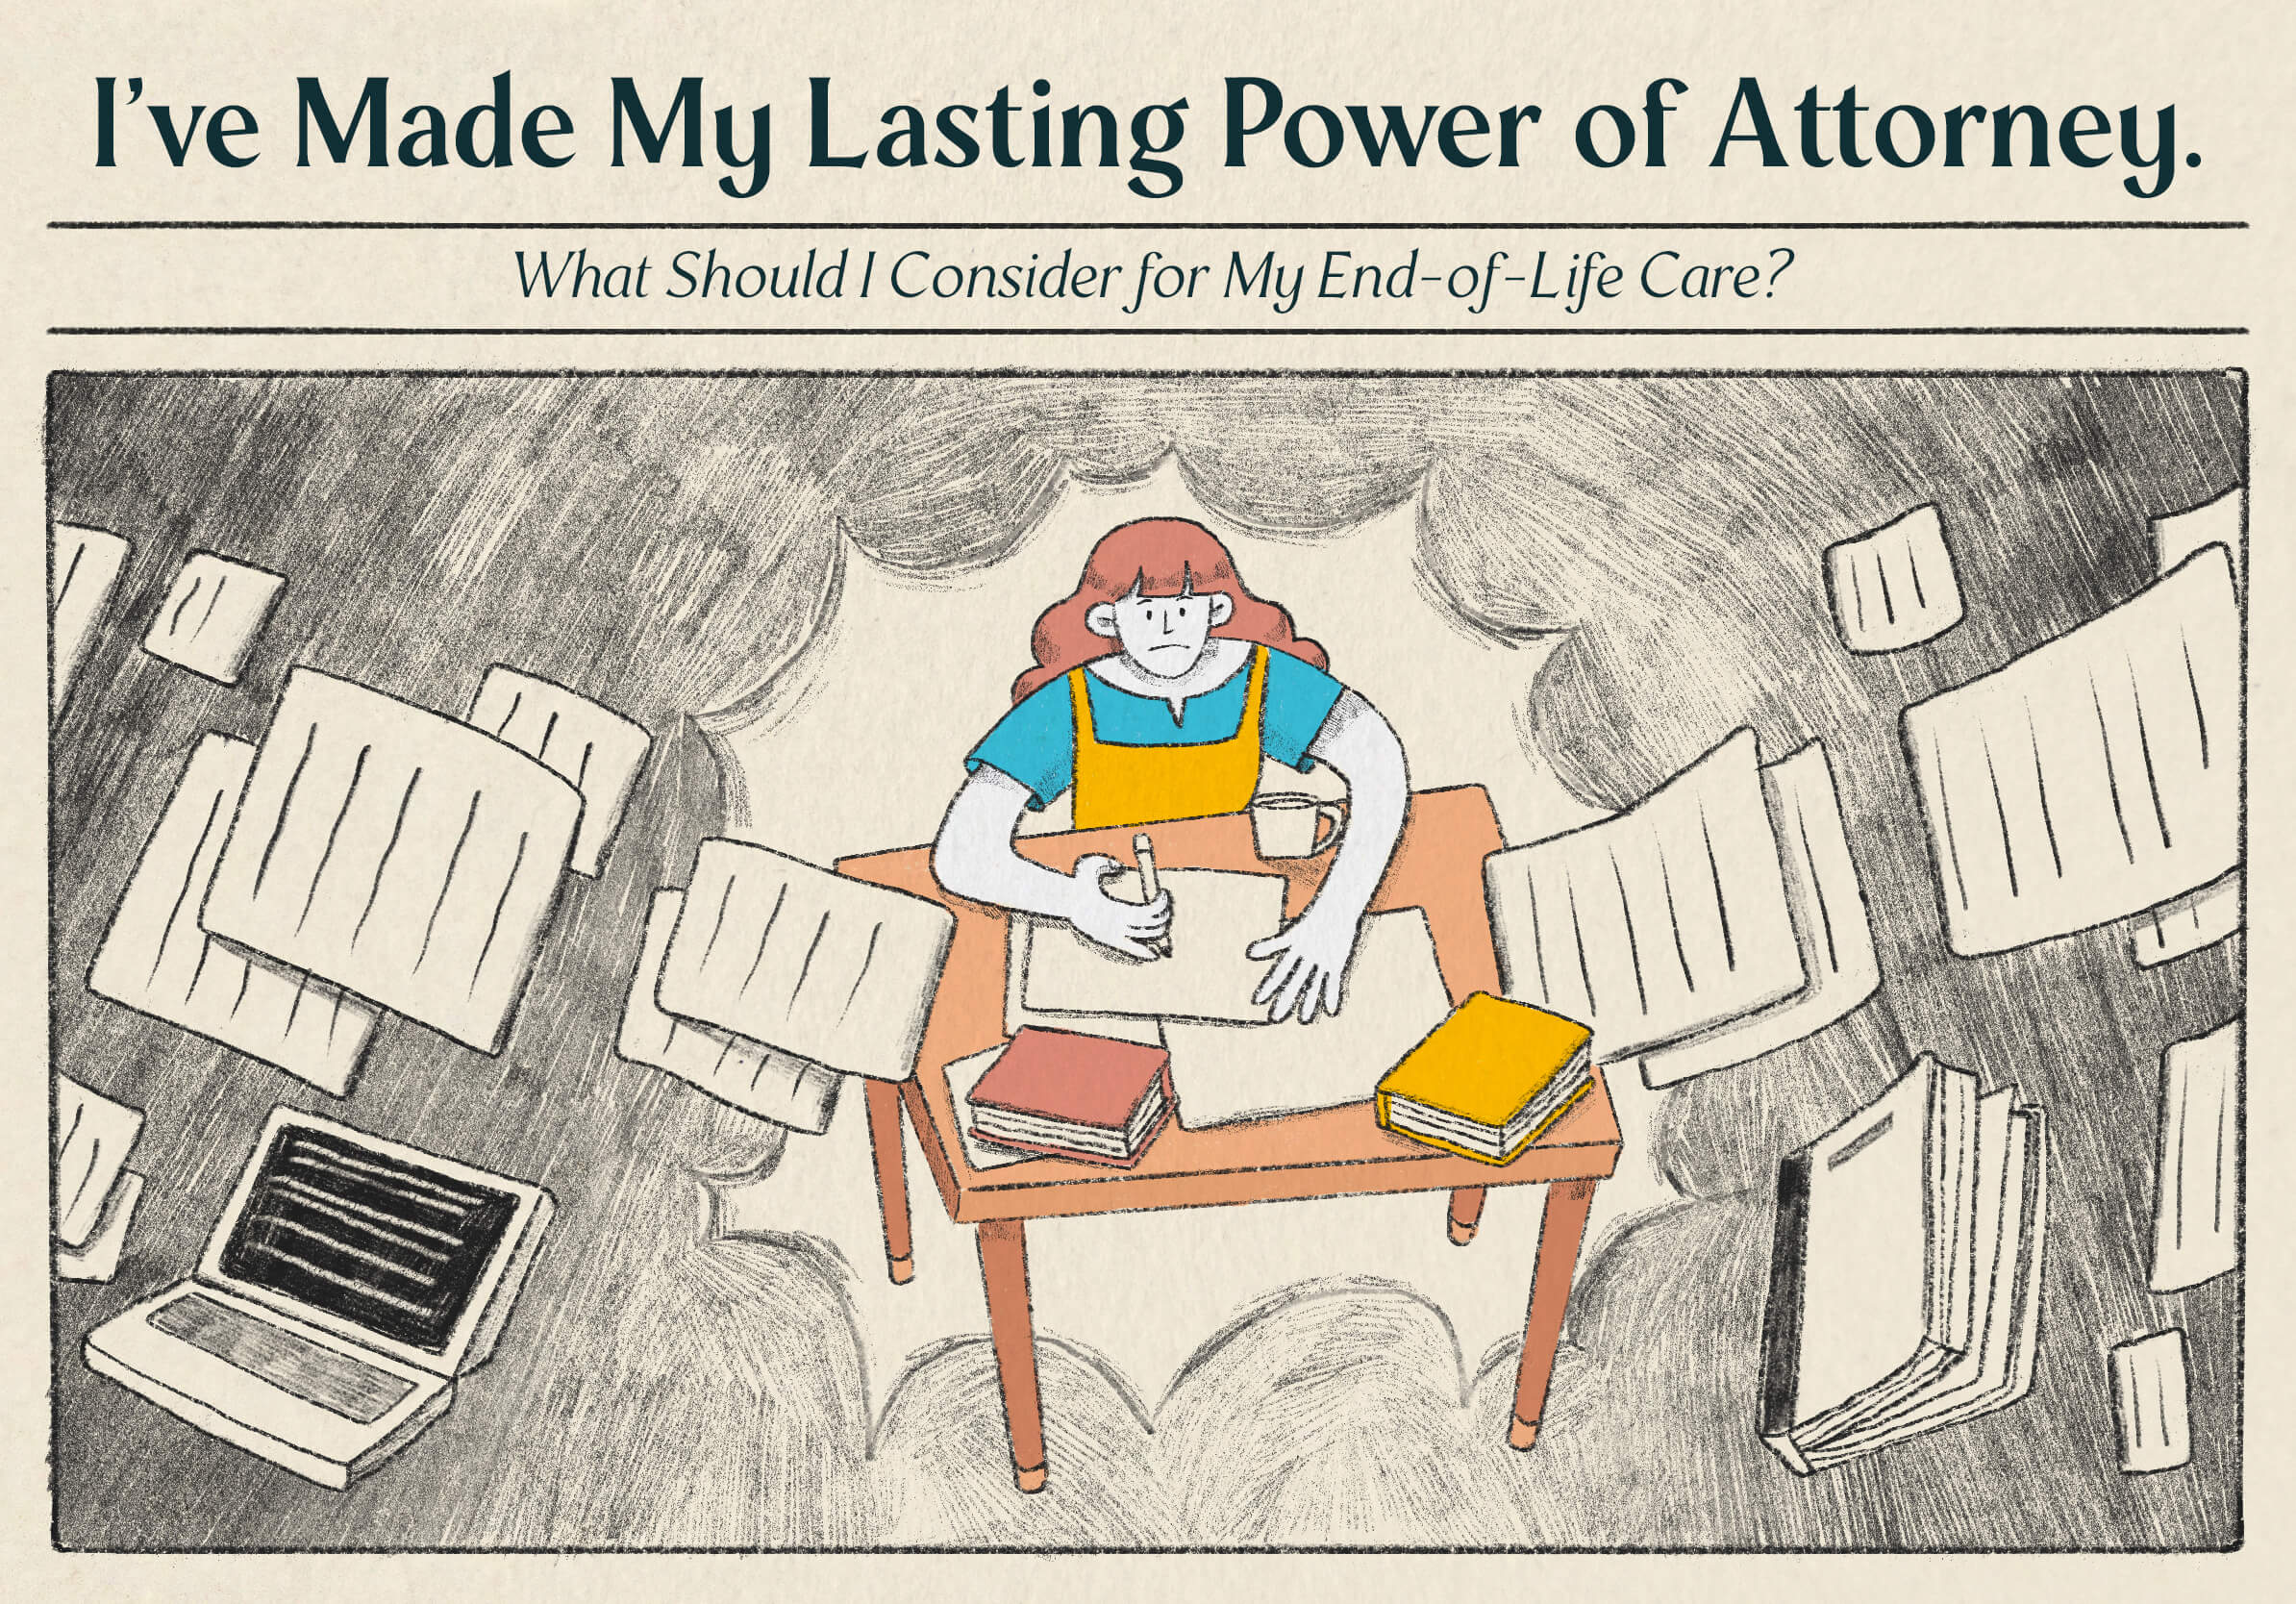 I've Made My Lasting Power of Attorney. What Should I Consider for My End-of-Life Care?